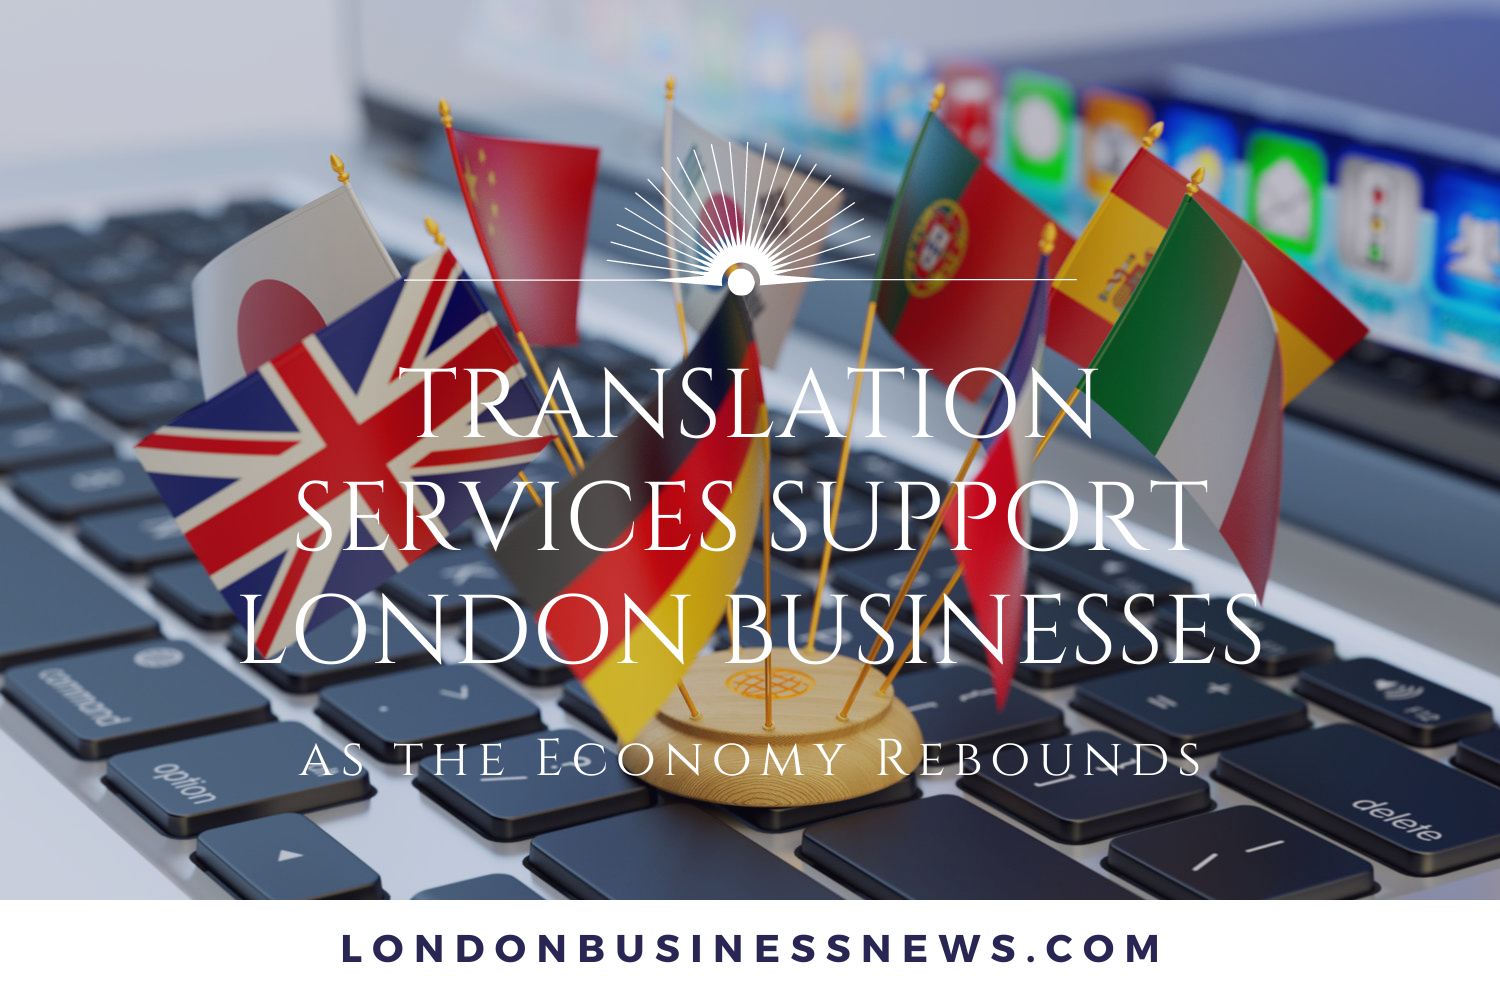 How can Translation Services support London Businesses as the Economy Rebounds